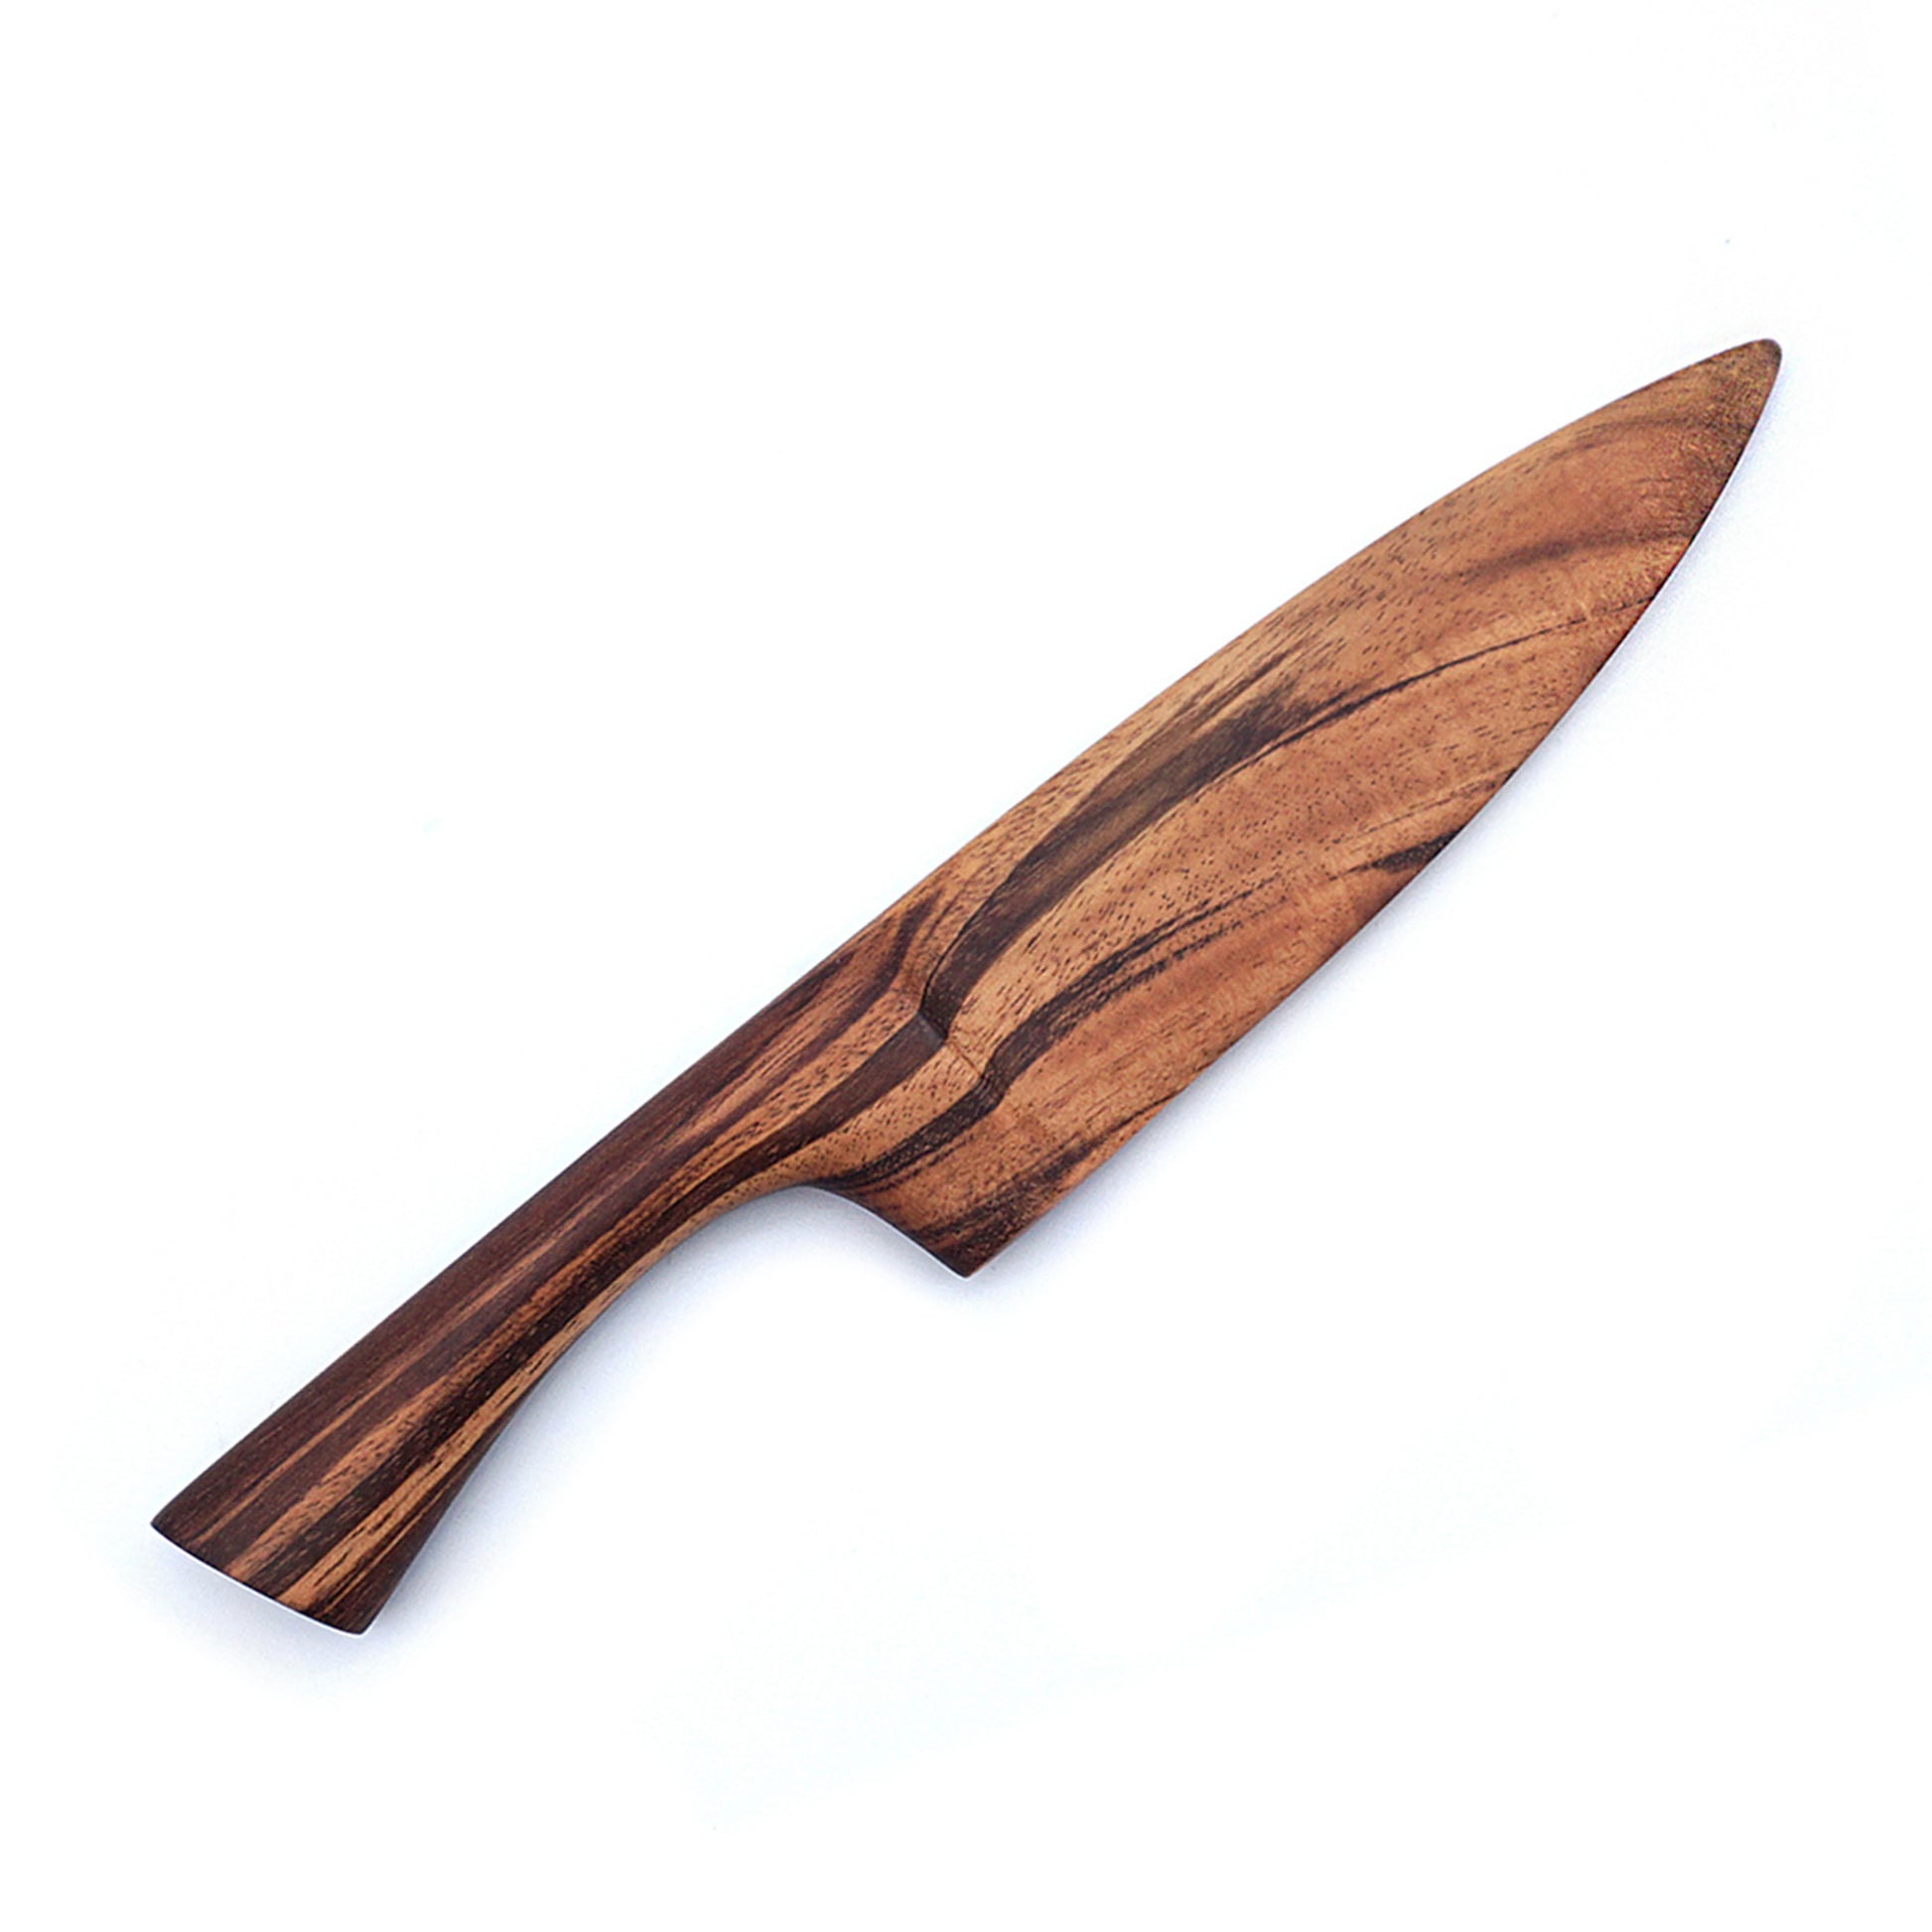 Wooden Knife, Mad Studios Wiki